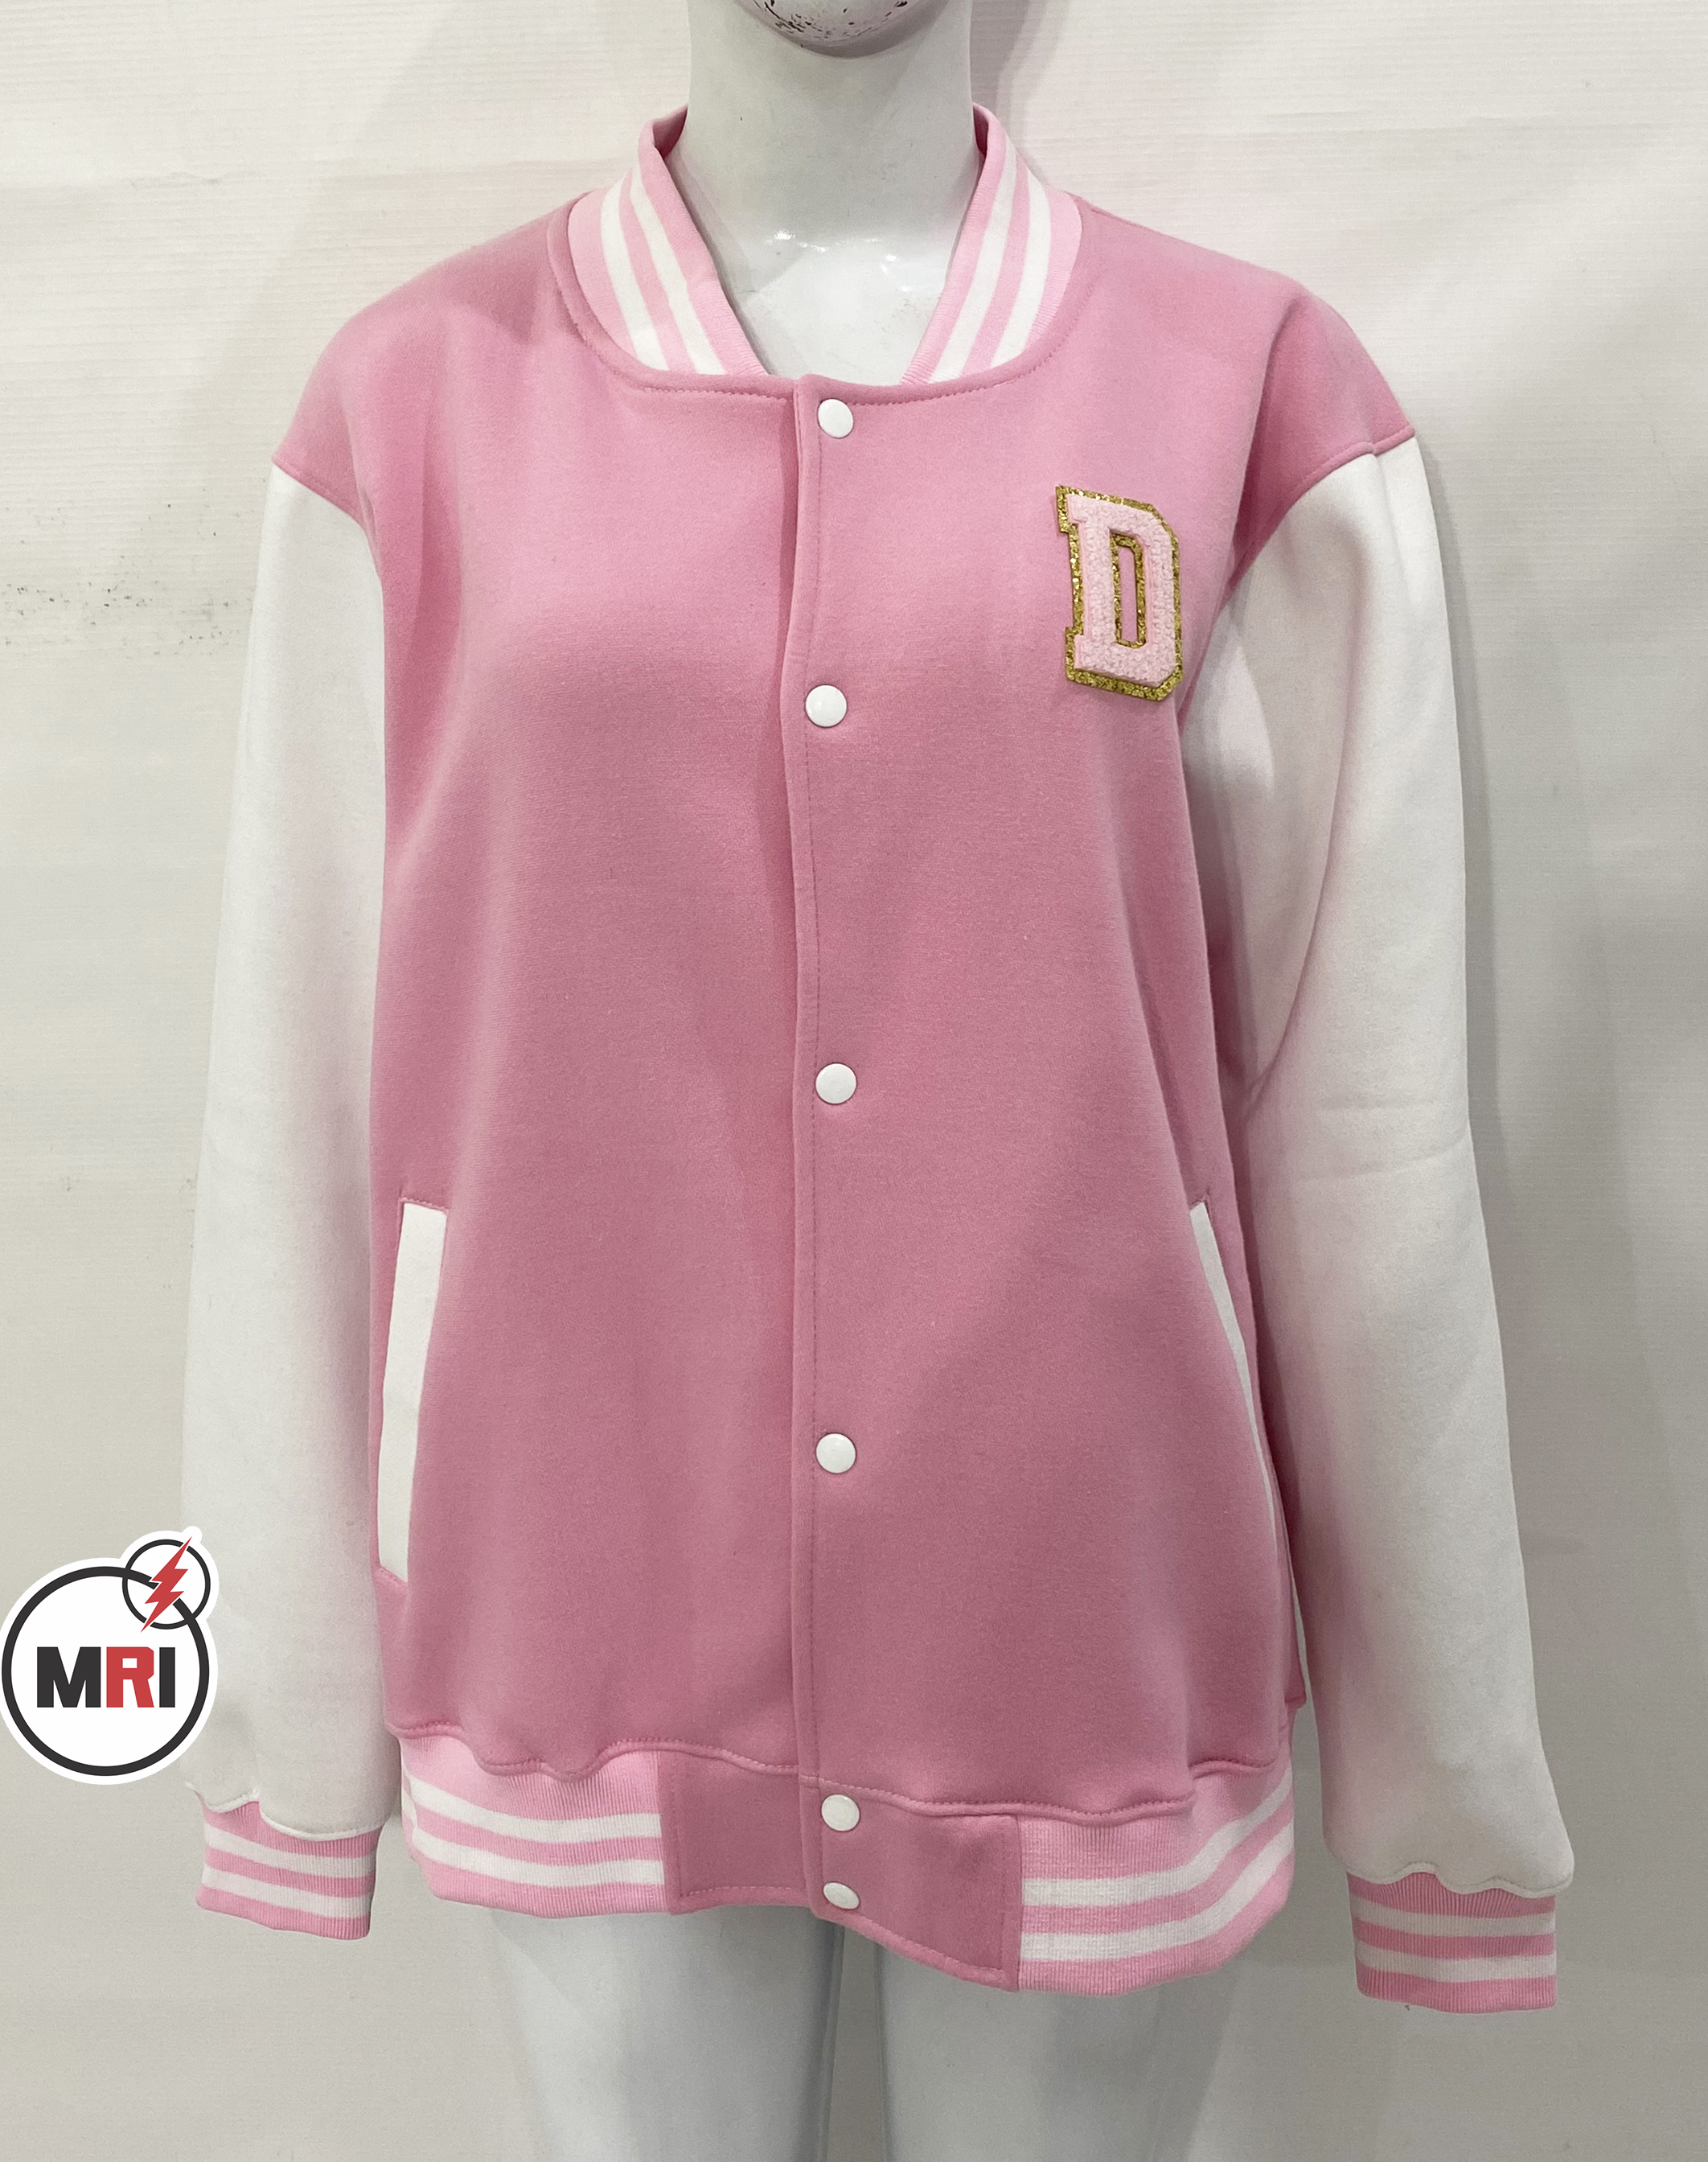 Cotton Fleece Pink and White Color Customized Embroidered Varsity Jacket